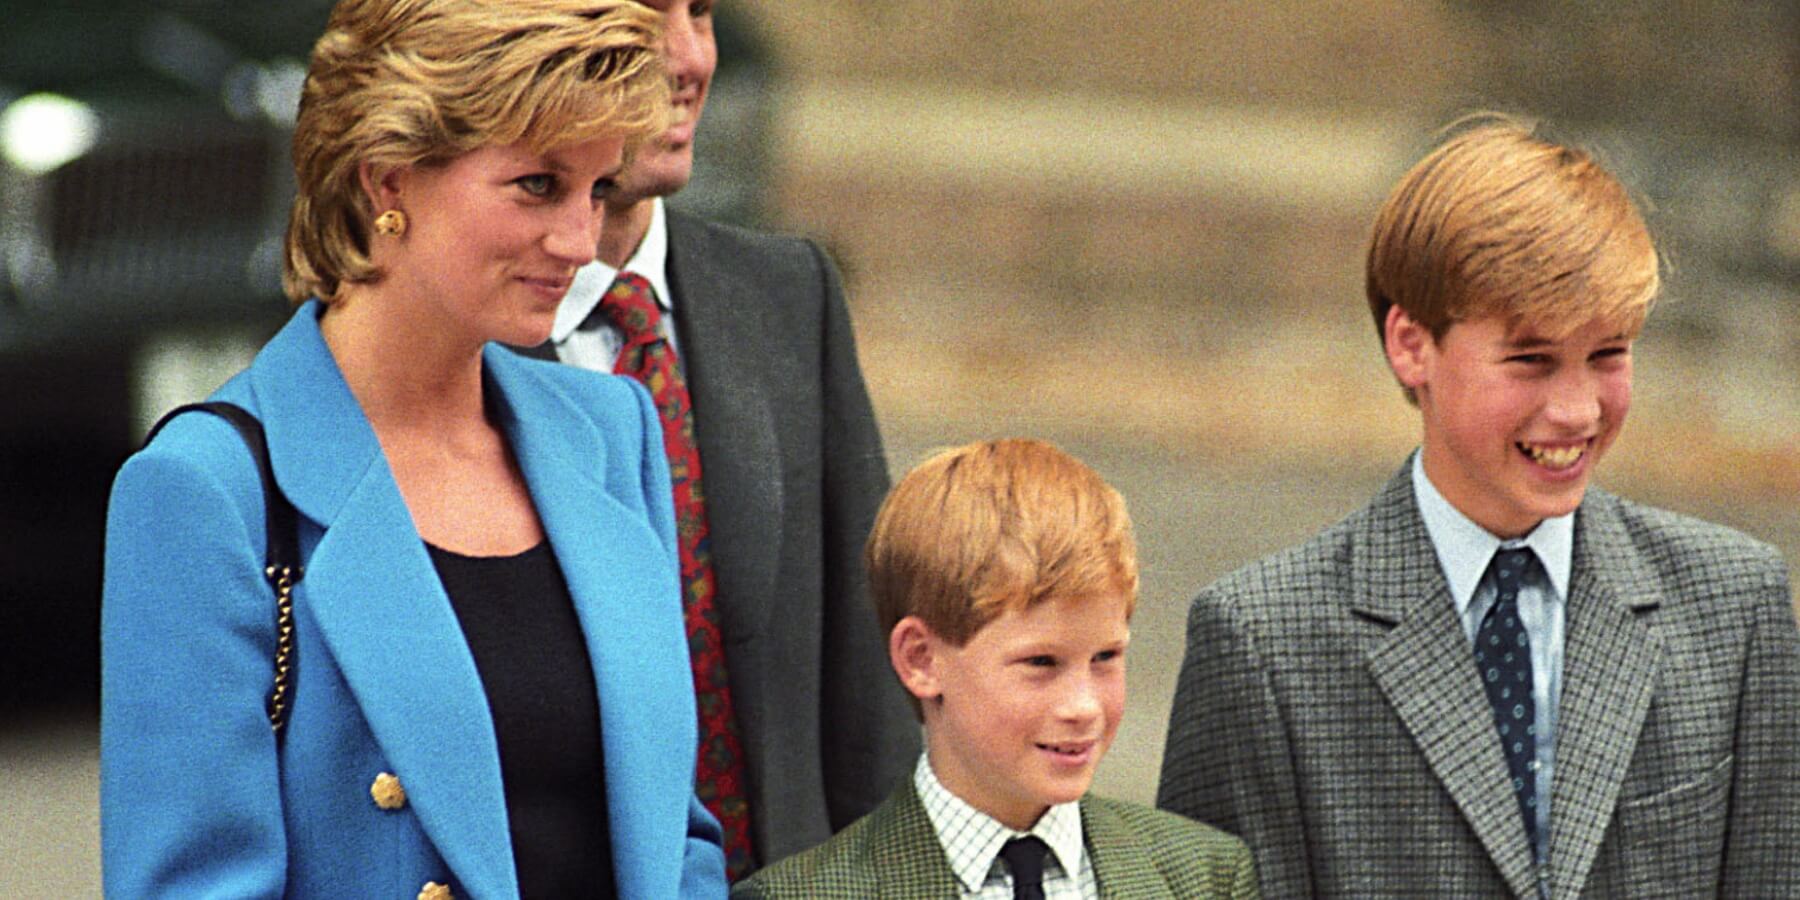 Prince William and Prince Harry's mother Princess Diana ensured they had plenty of 'comfort foods' for meals.